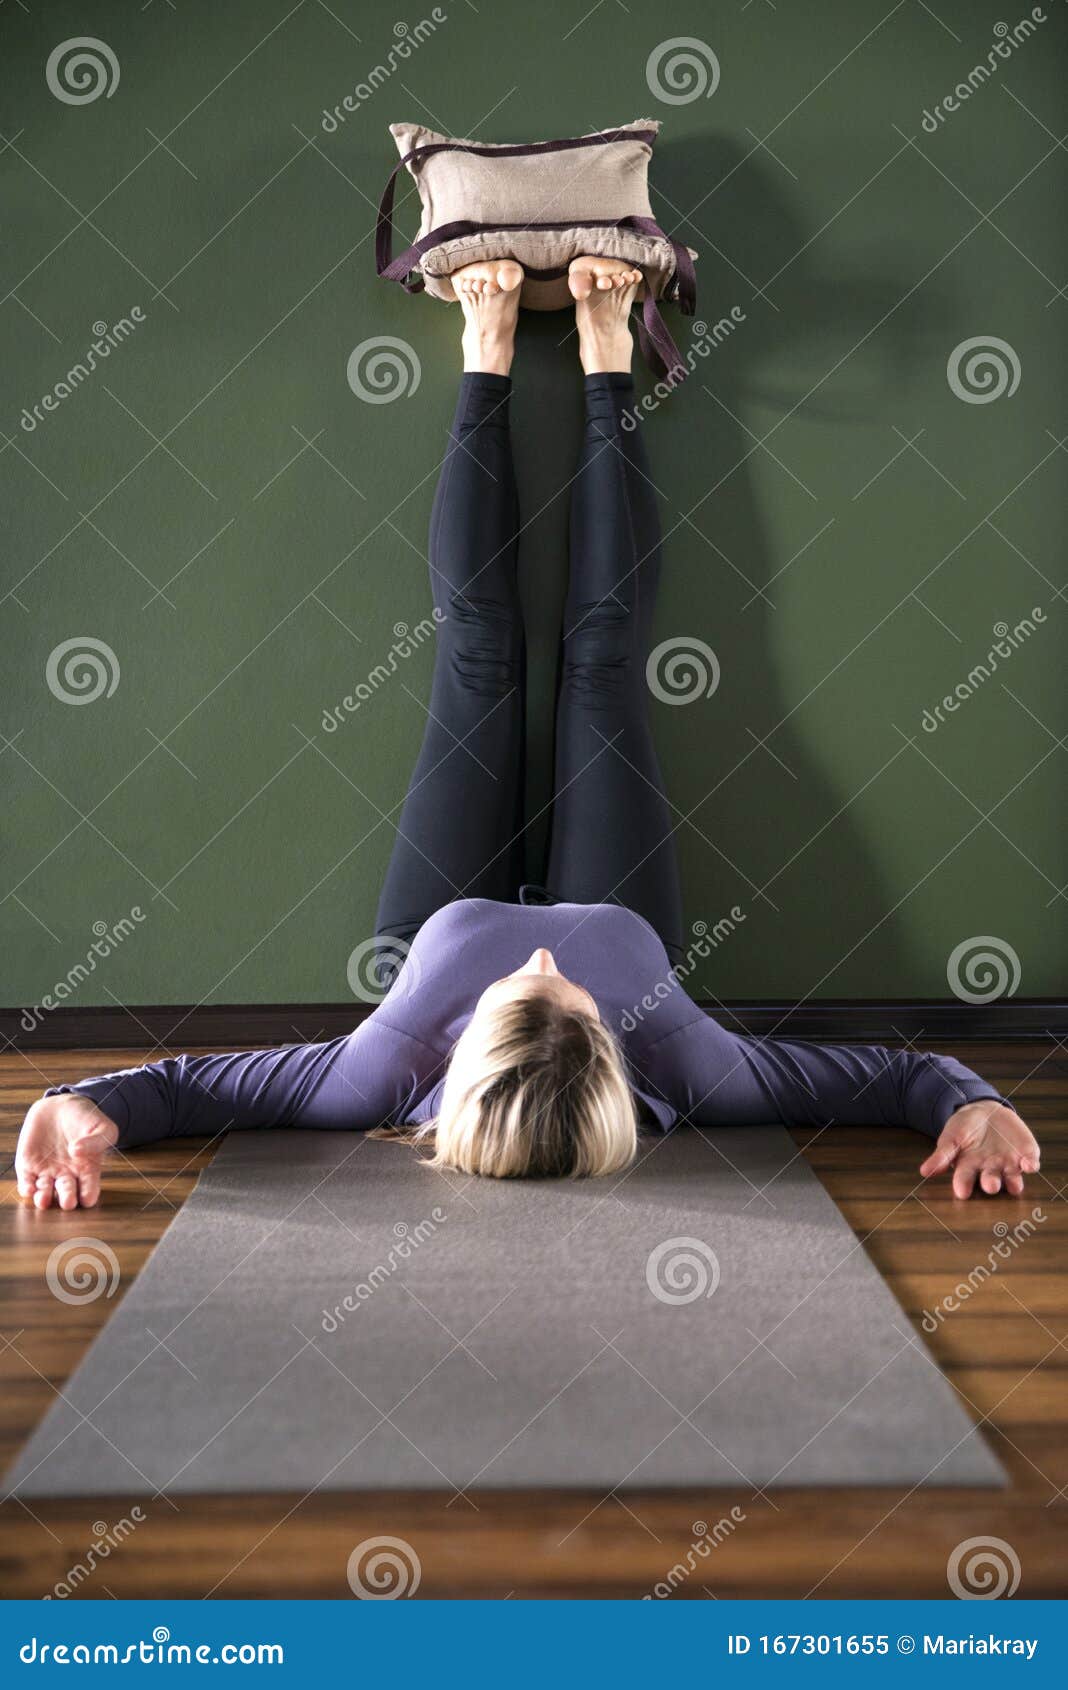 Full length portrait of young fit woman doing a yoga pose standing